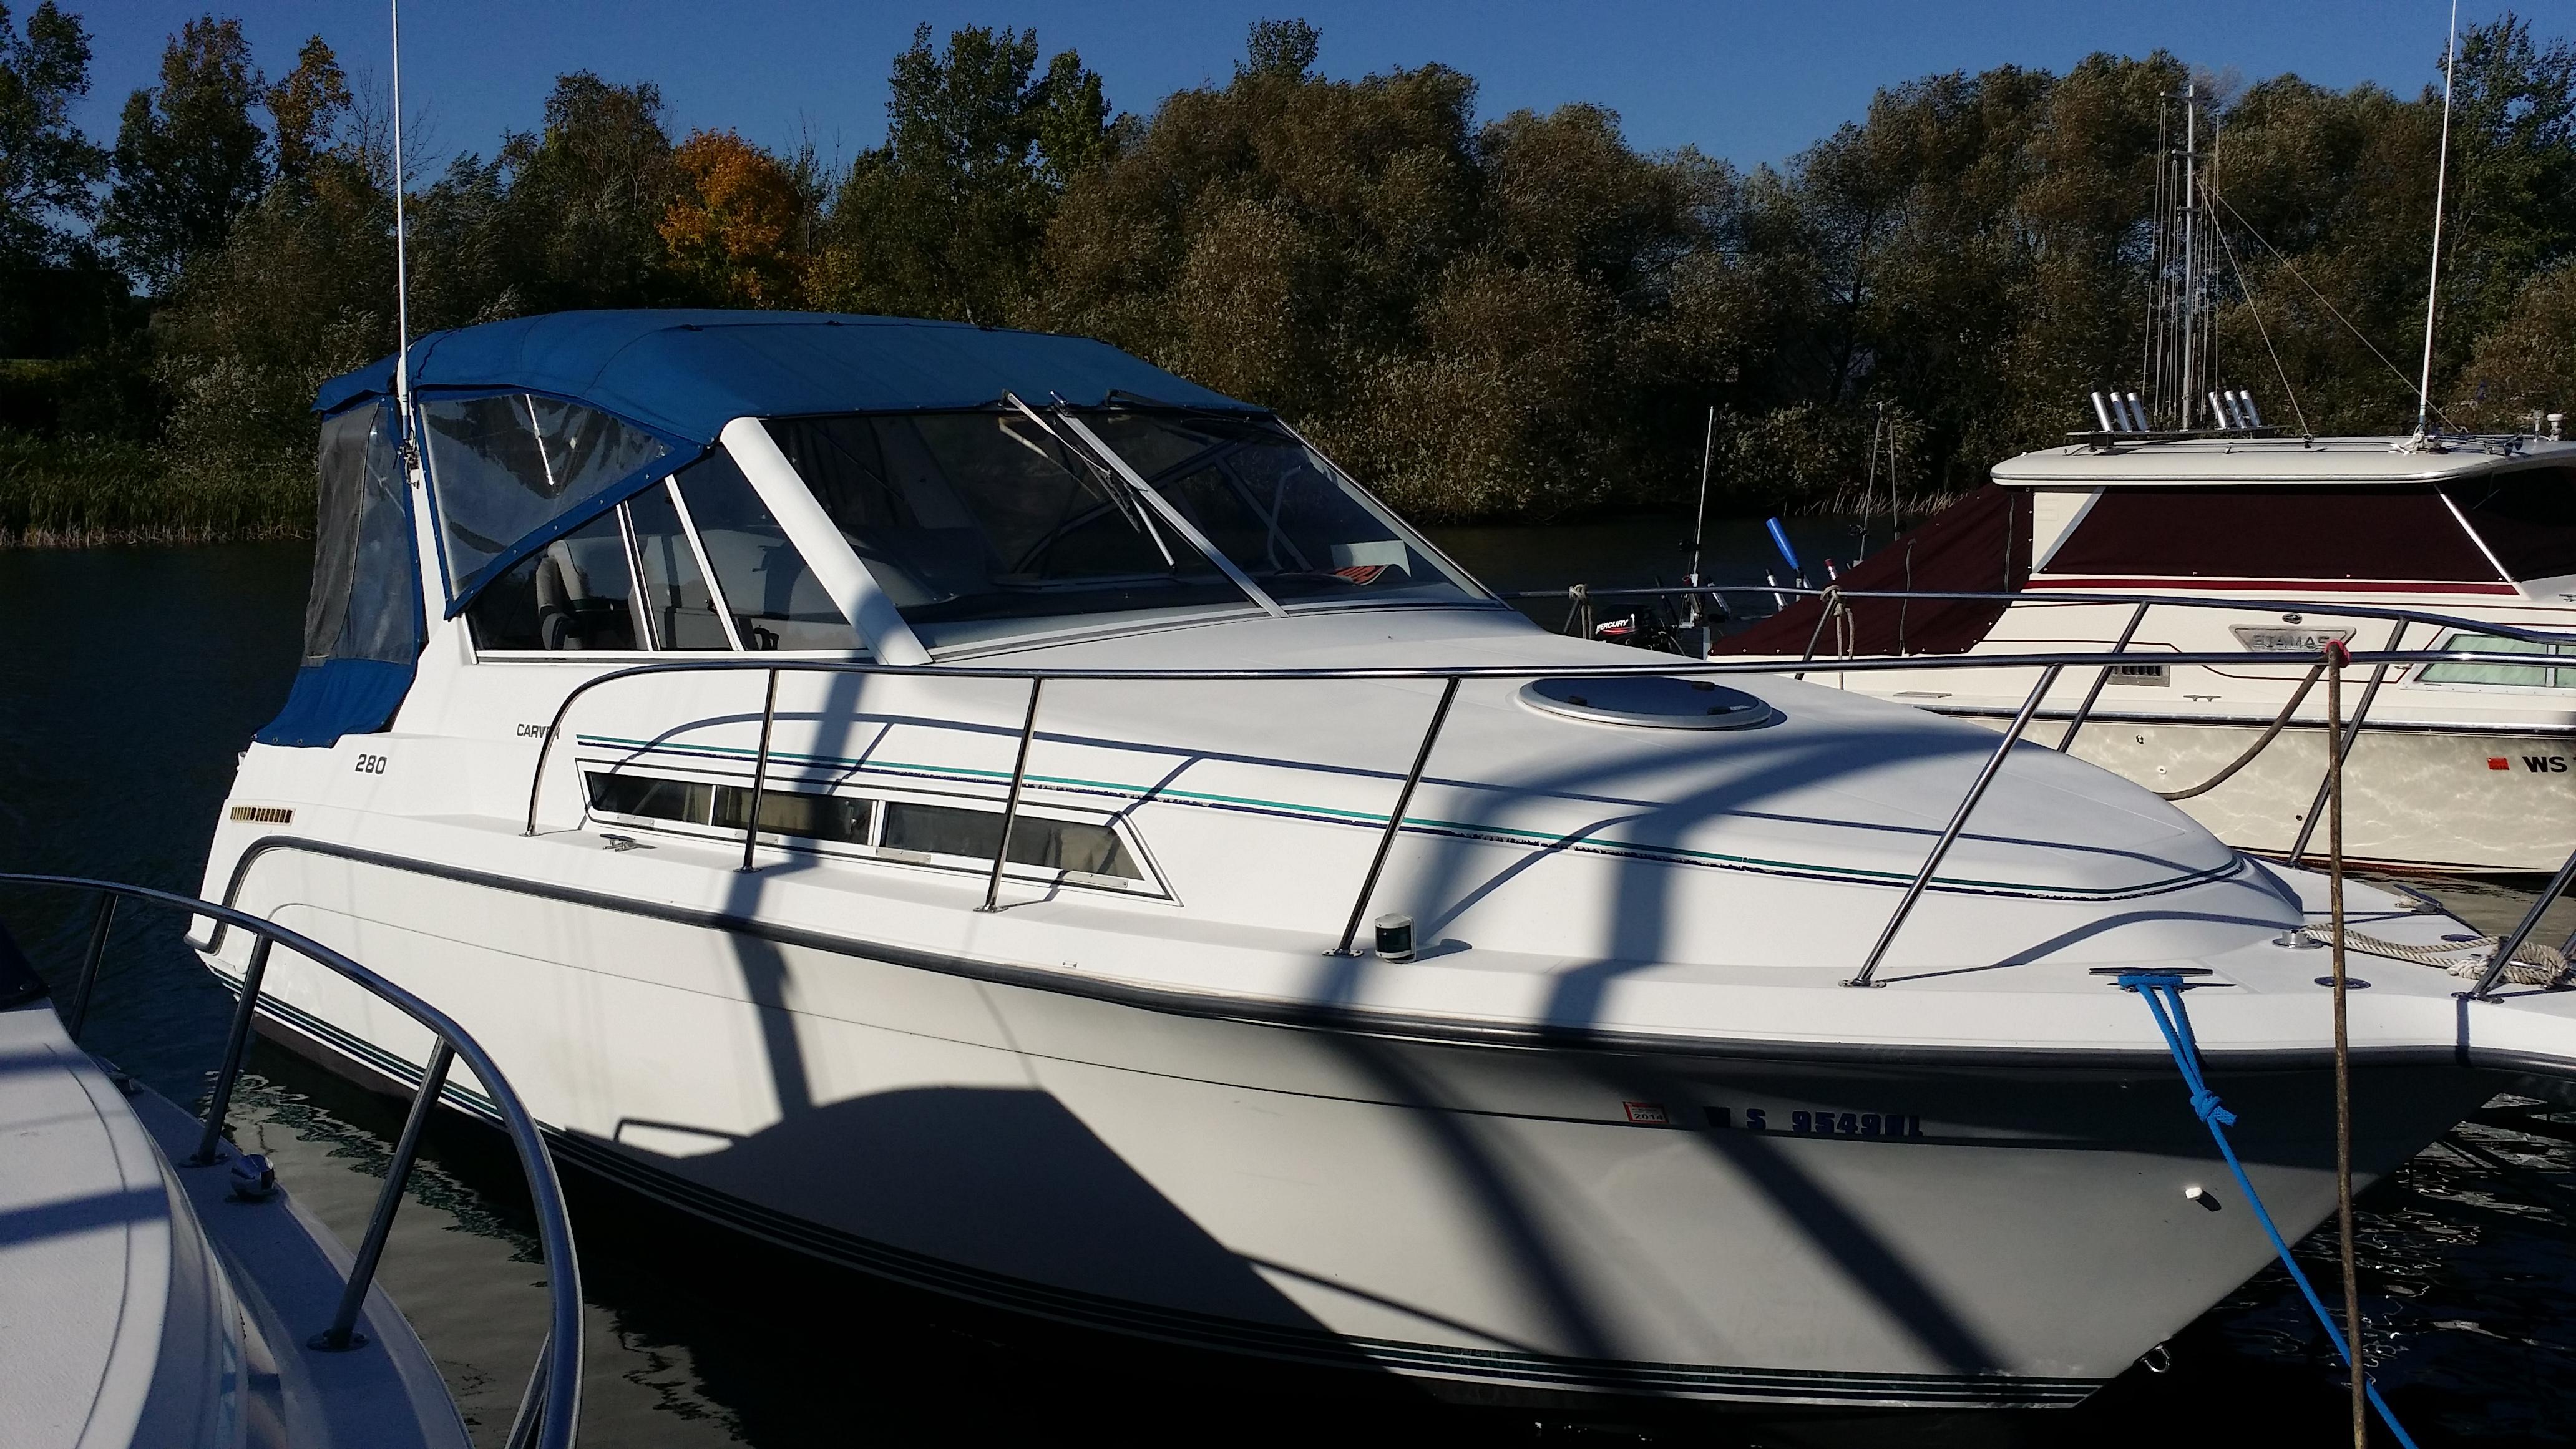 1995 Carver 280 Mid Cabin Express